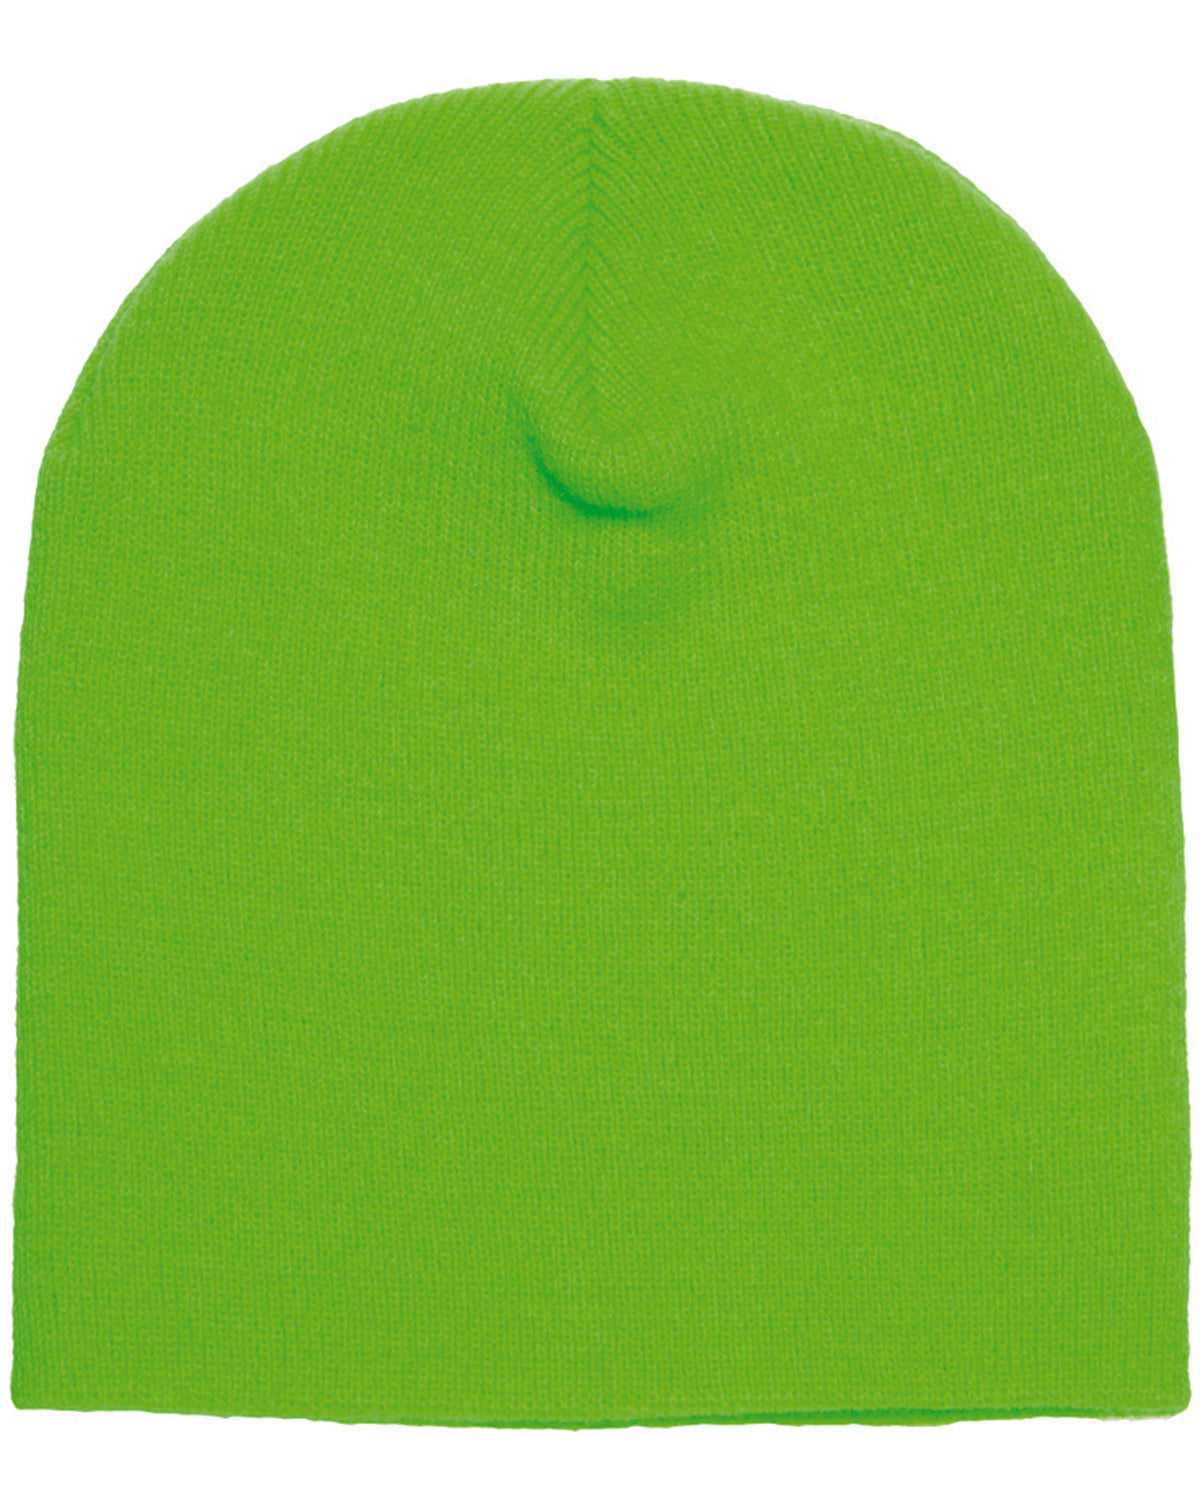 Headwear SAFETY GREEN OS Yupoong